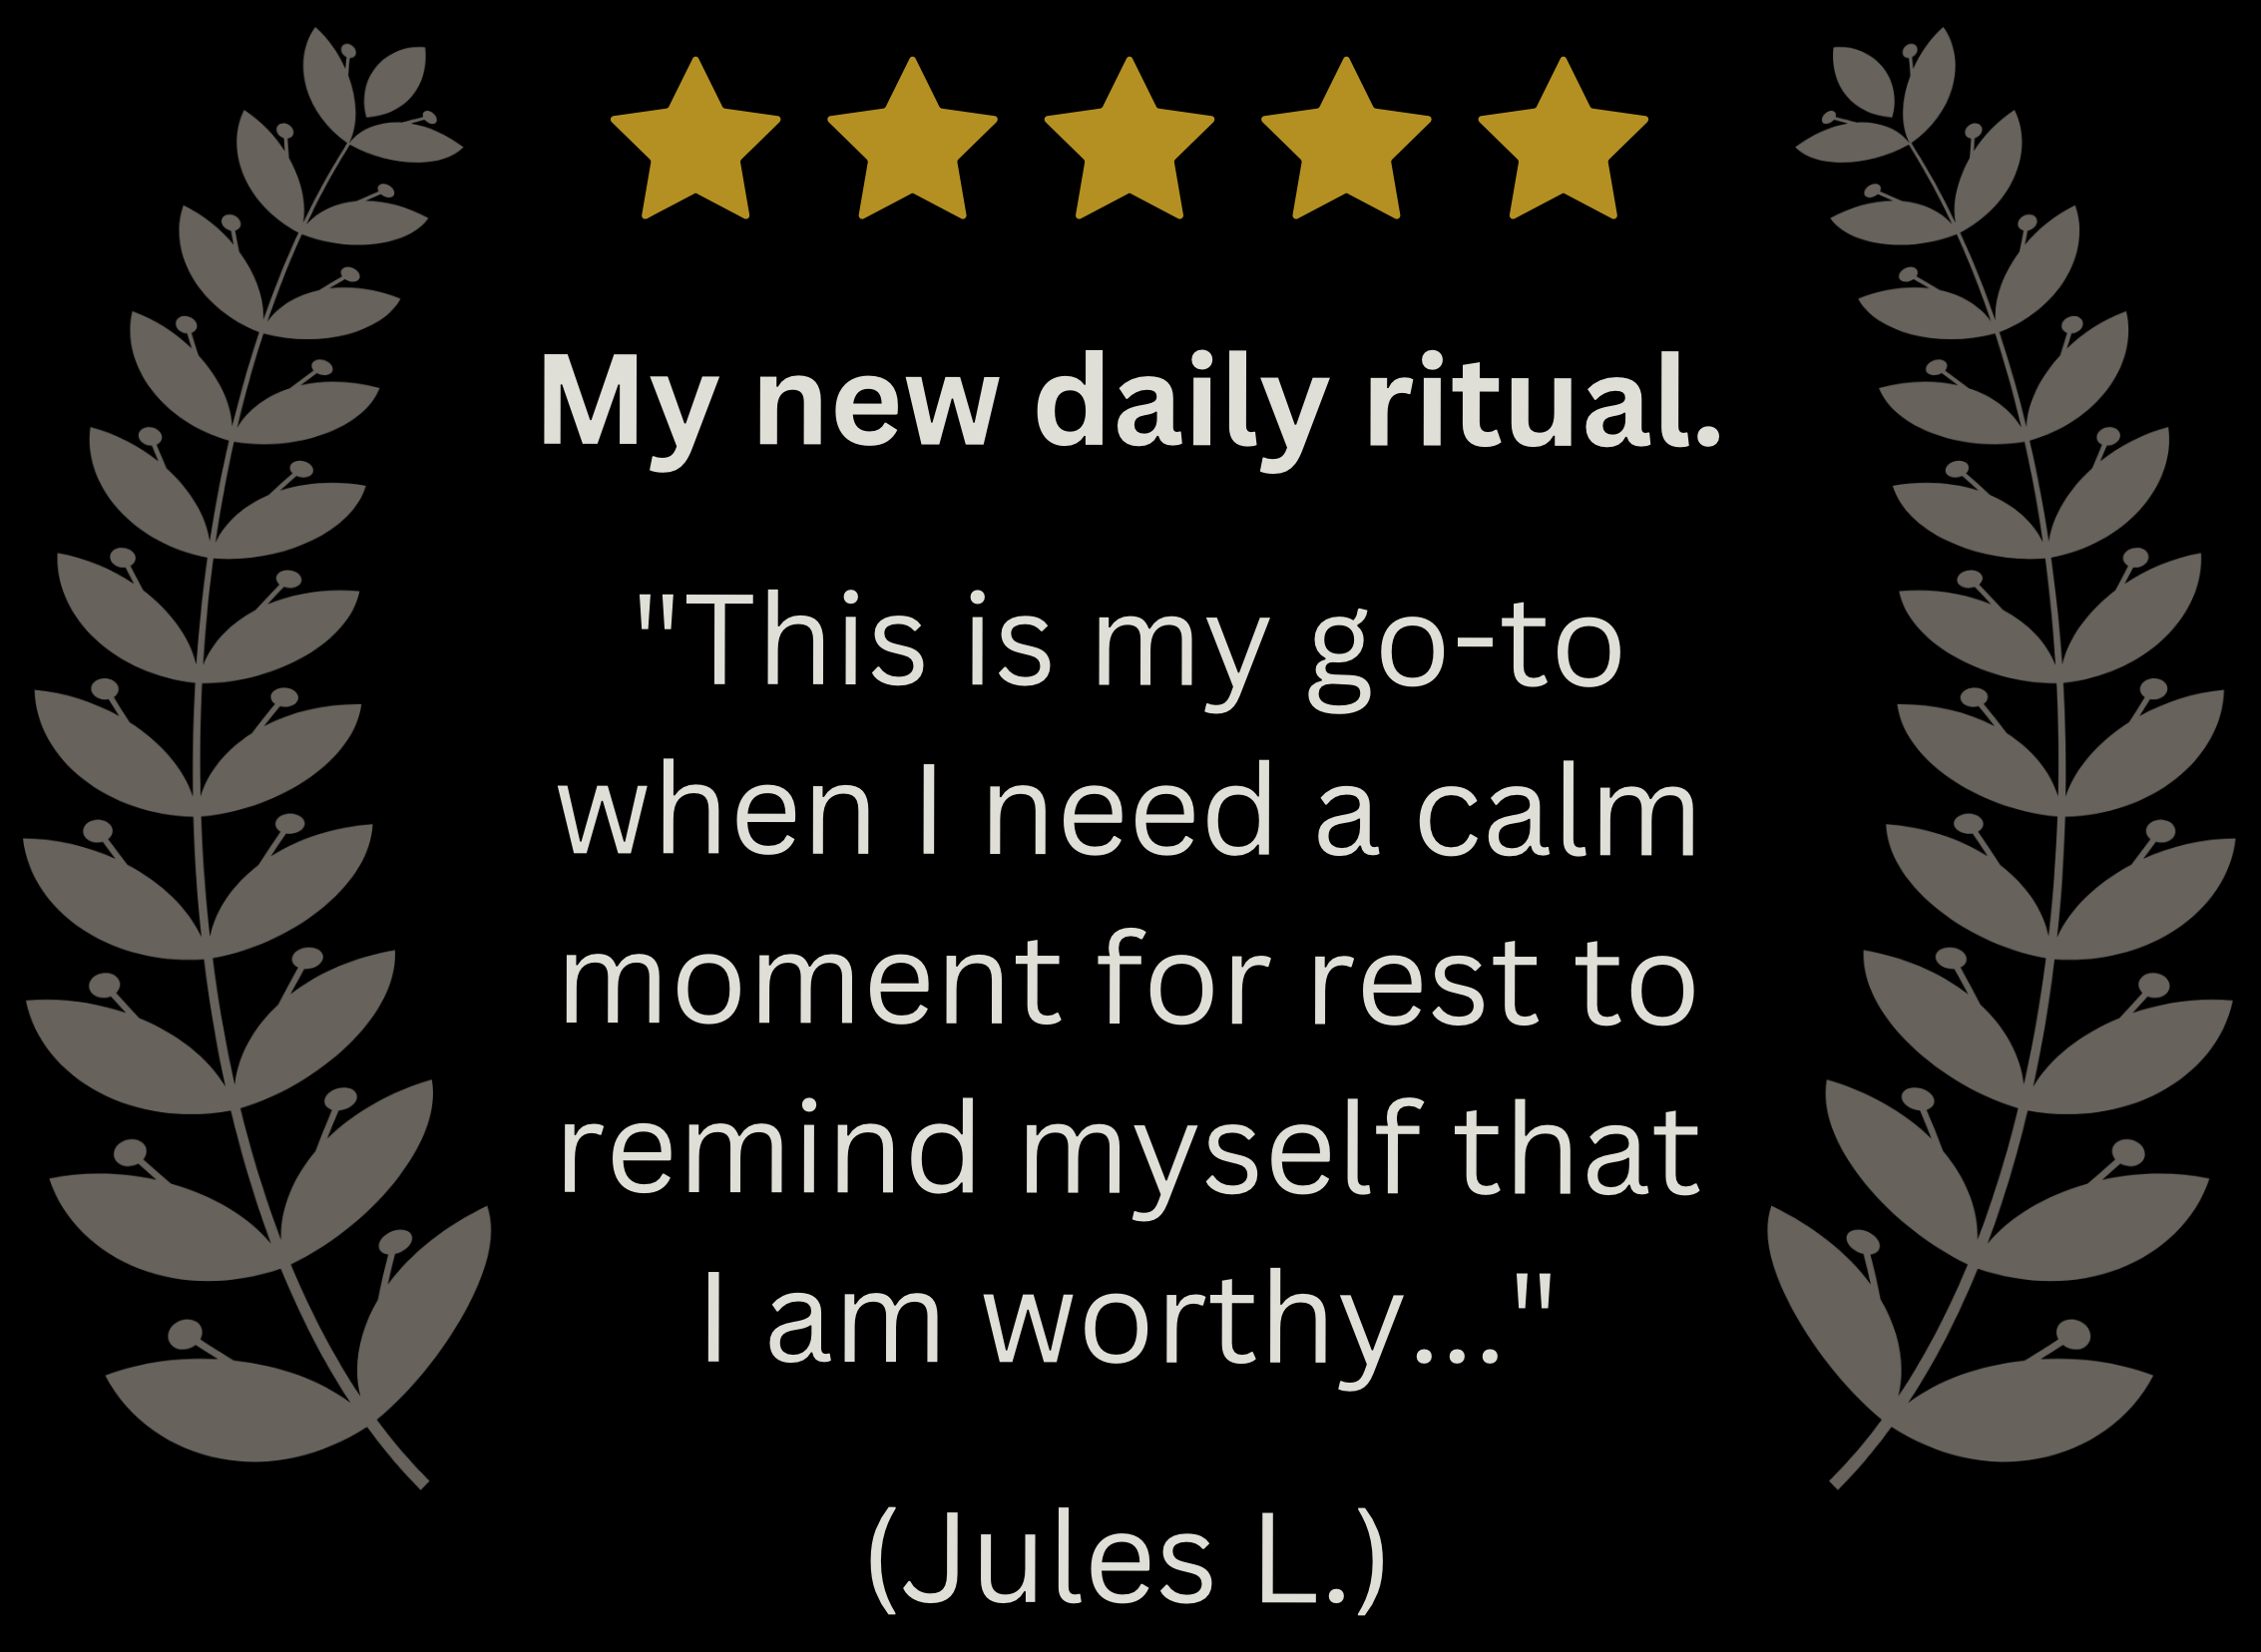 5-star review from Jules L. stating, "My new daily ritual. This is my go-to when I need a calm moment for rest to remind myself that I am worthy…"